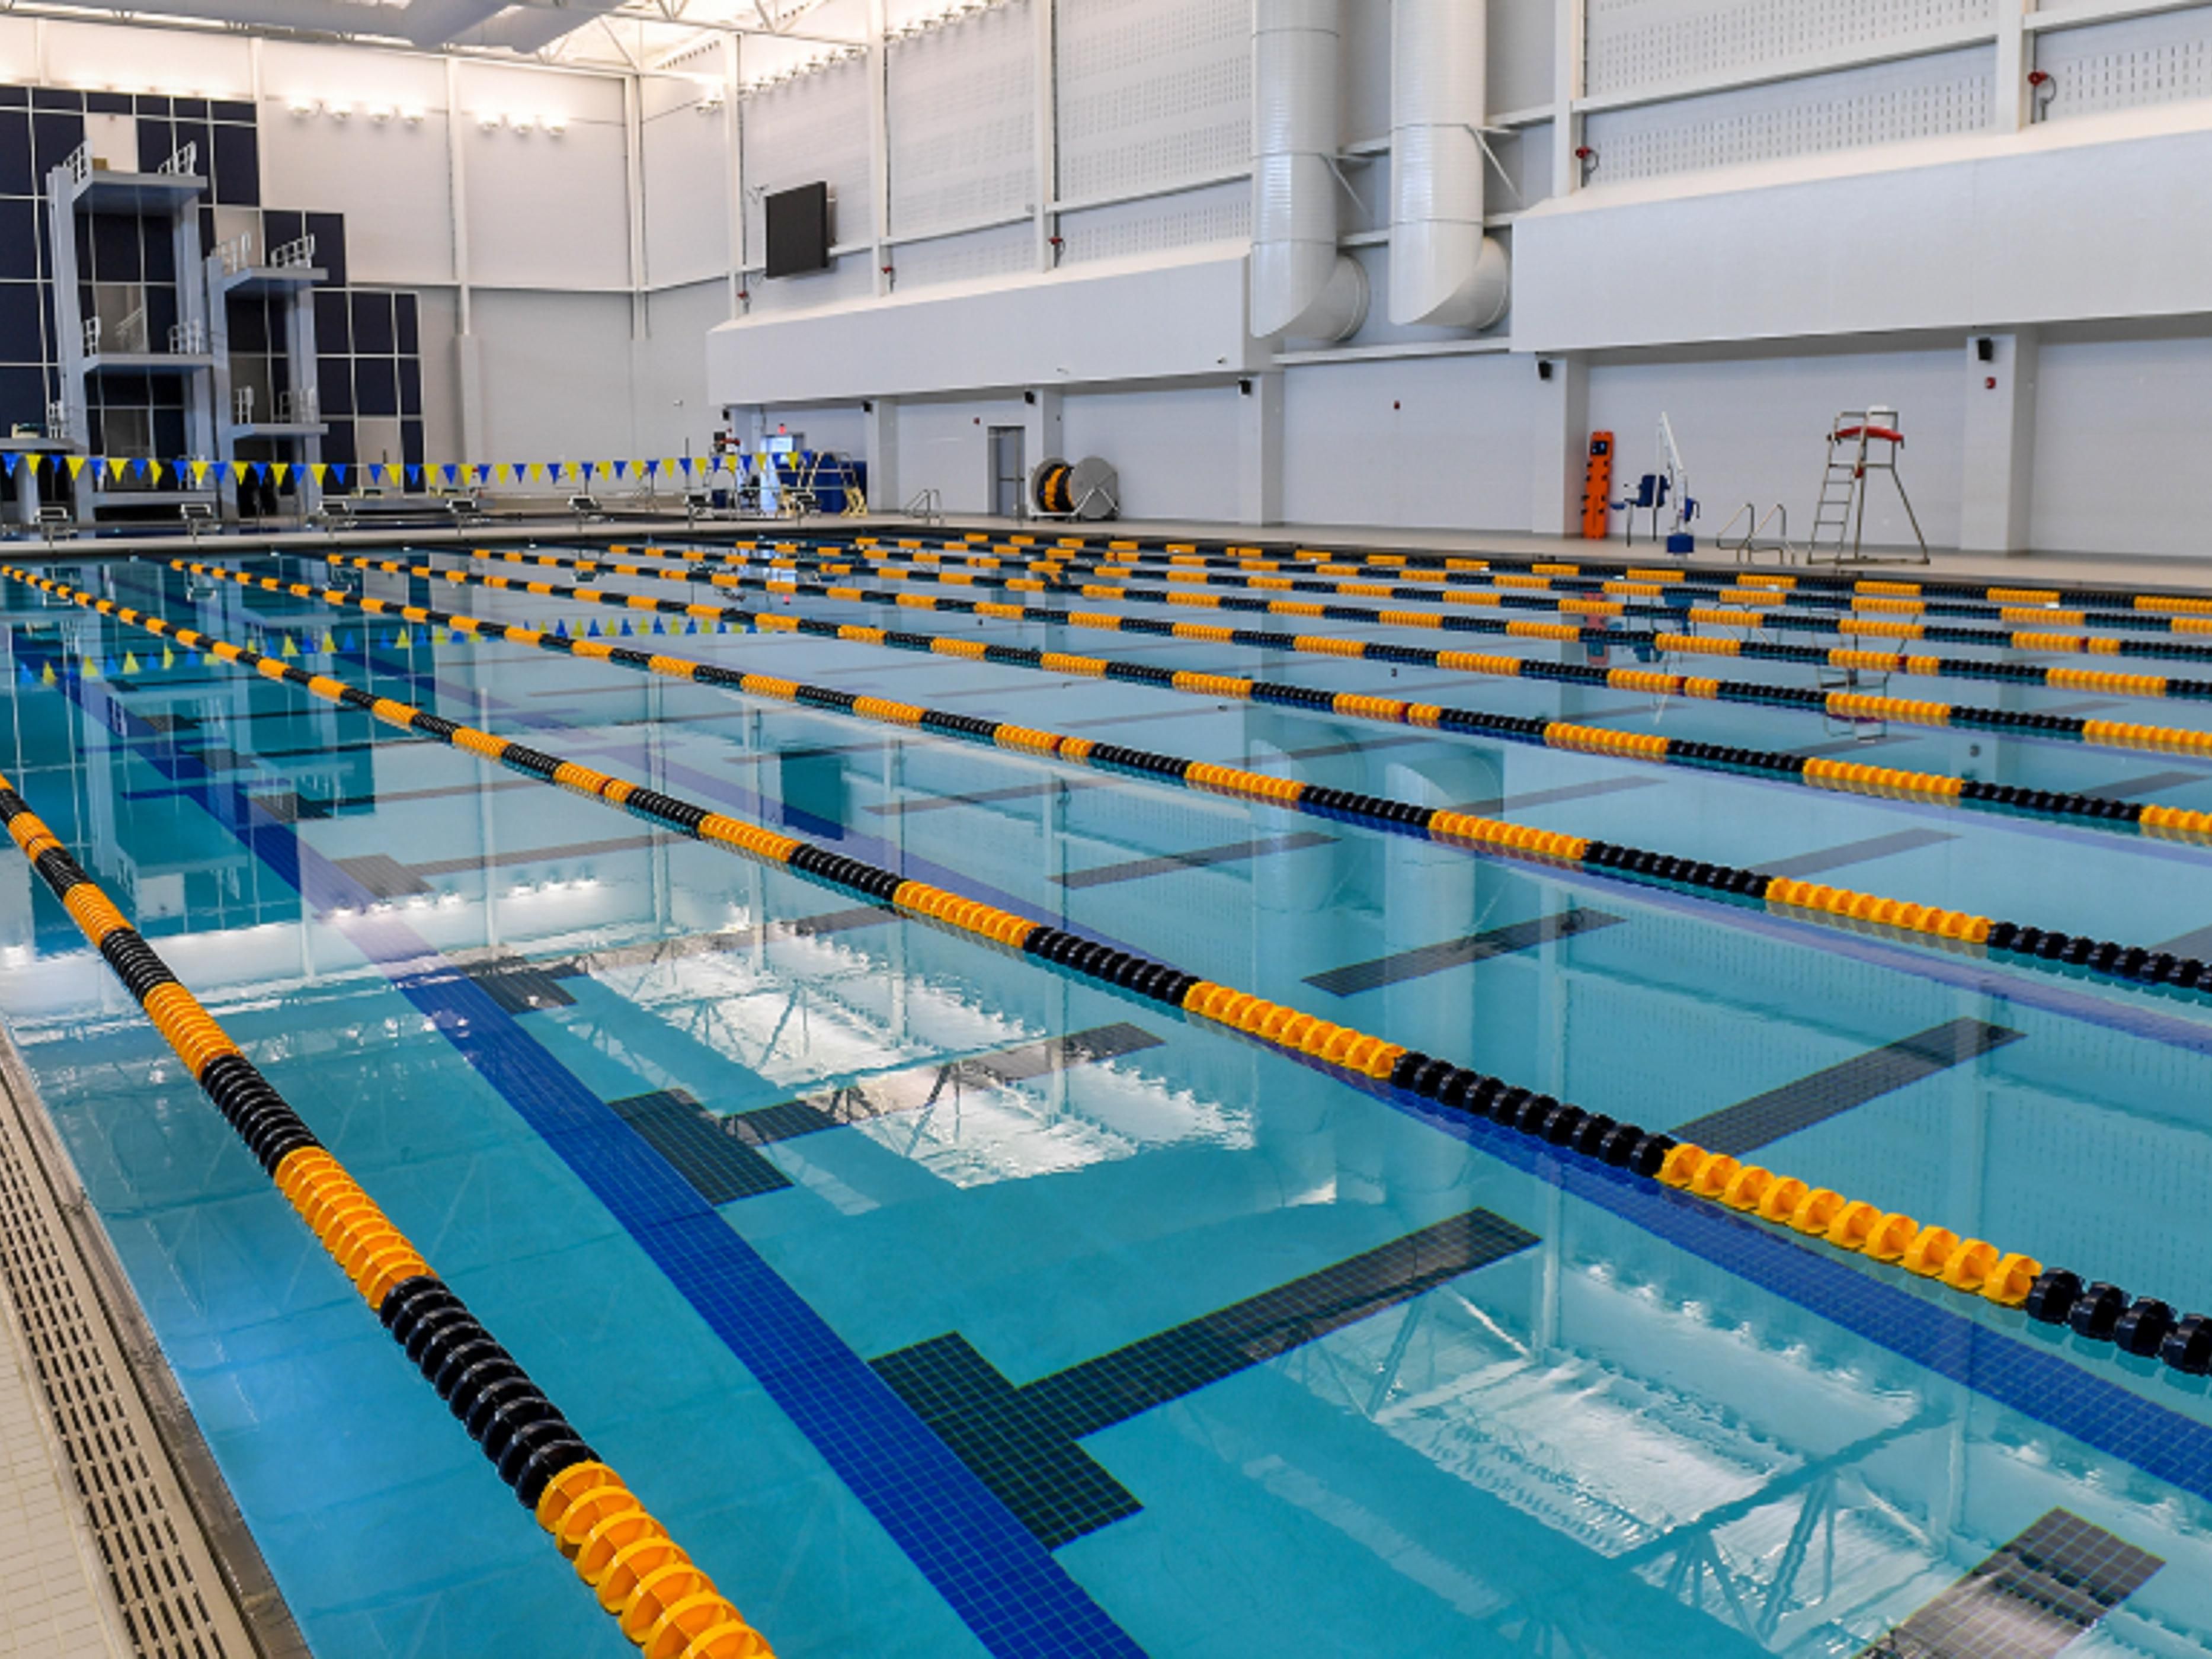 The Mylan Park Aquatic Center is an impressive, state-of-the-art, and fully accessible 90,000 square foot facility featuring a 50-meter Olympic pool and diving well. This facility promotes life-long health development in an innovative, friendly, and well-maintained environment. Located only 15 minutes from the hotel! 